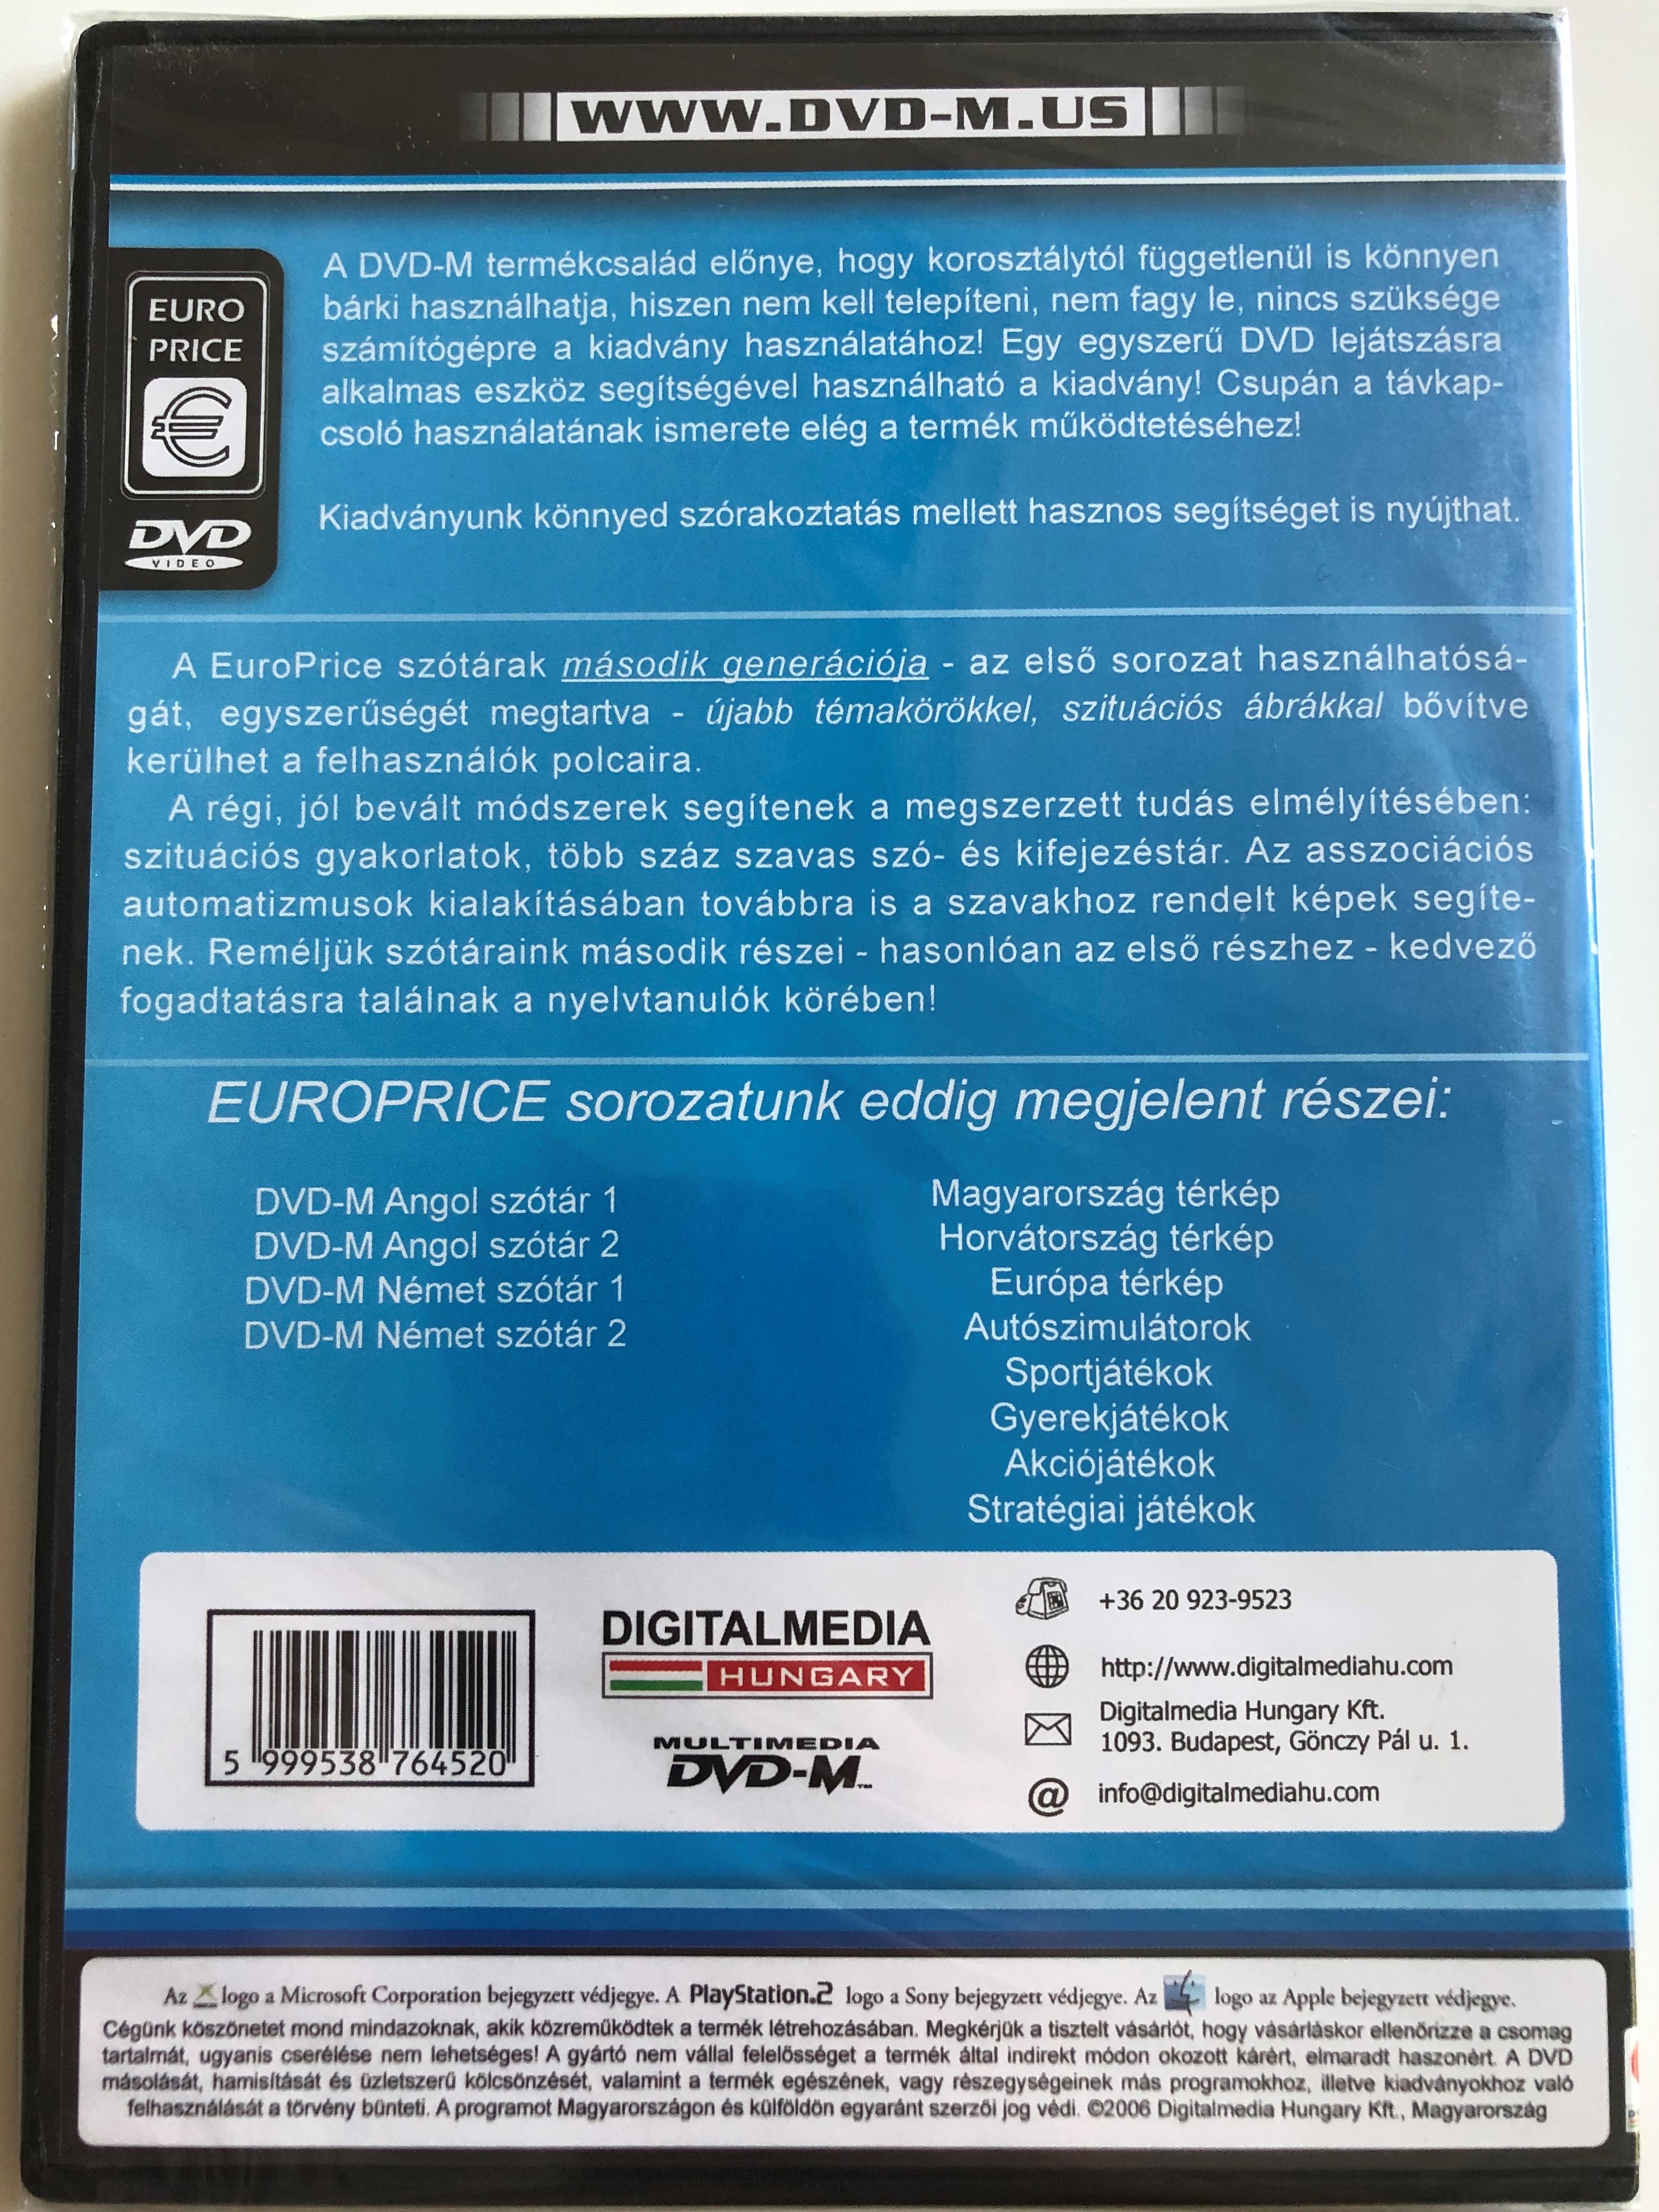 euro-price-2-angol-sz-t-r-english-dictionary-dvd-m-2006-can-be-played-on-dvd-players-ps2-xbox-mac-and-pc-2-.jpg